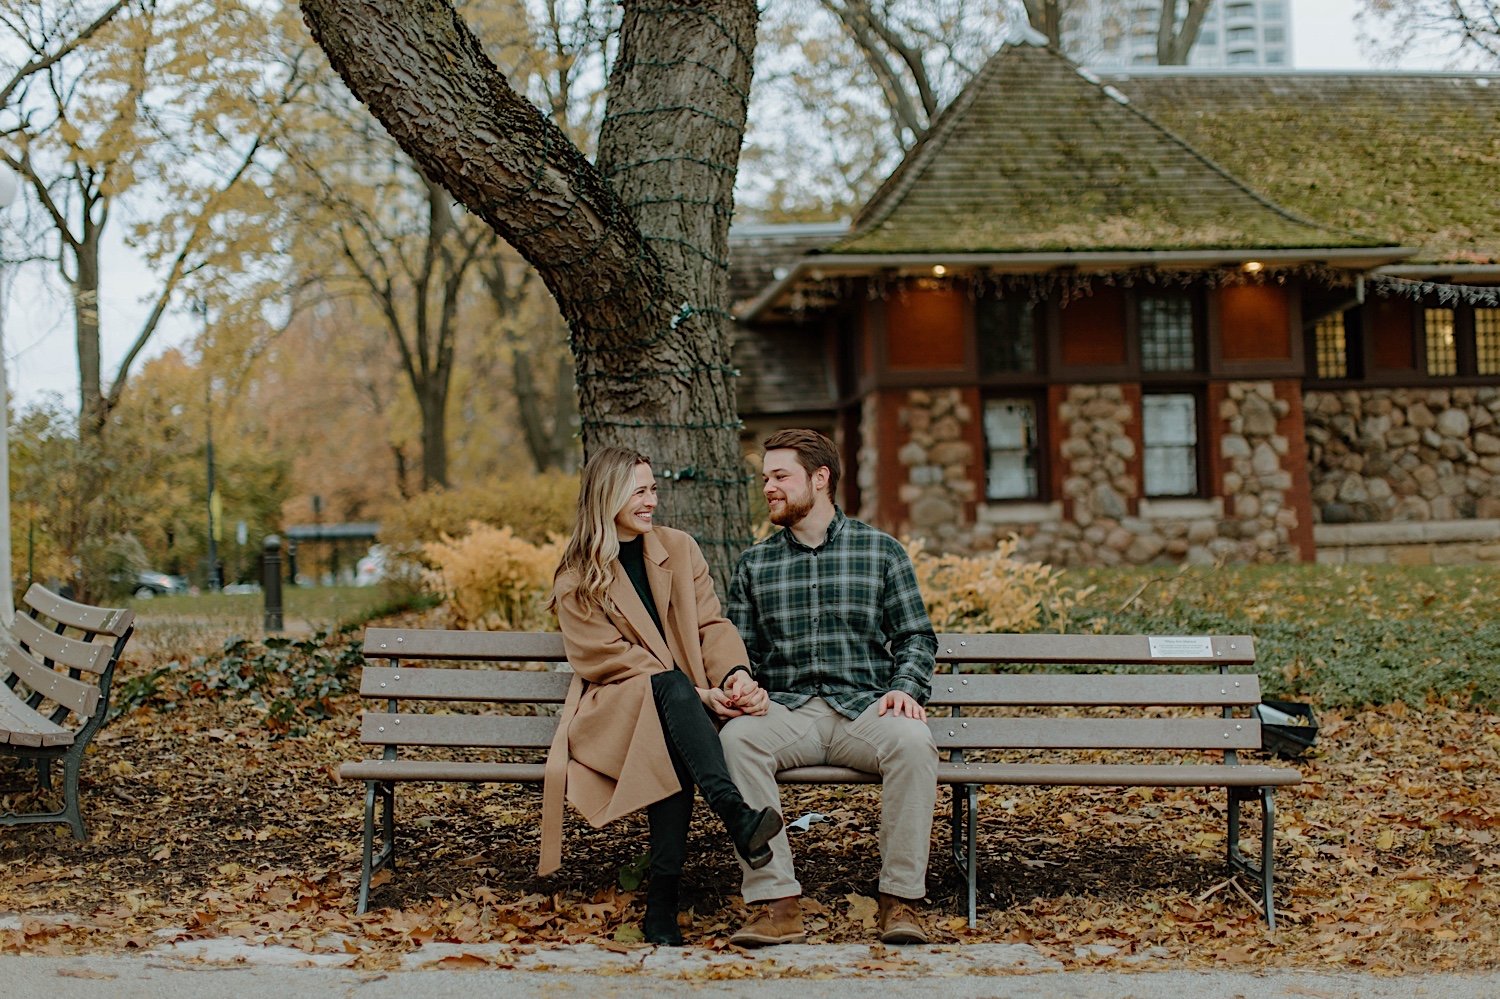 Couple smiles and sit on a bench together in a park